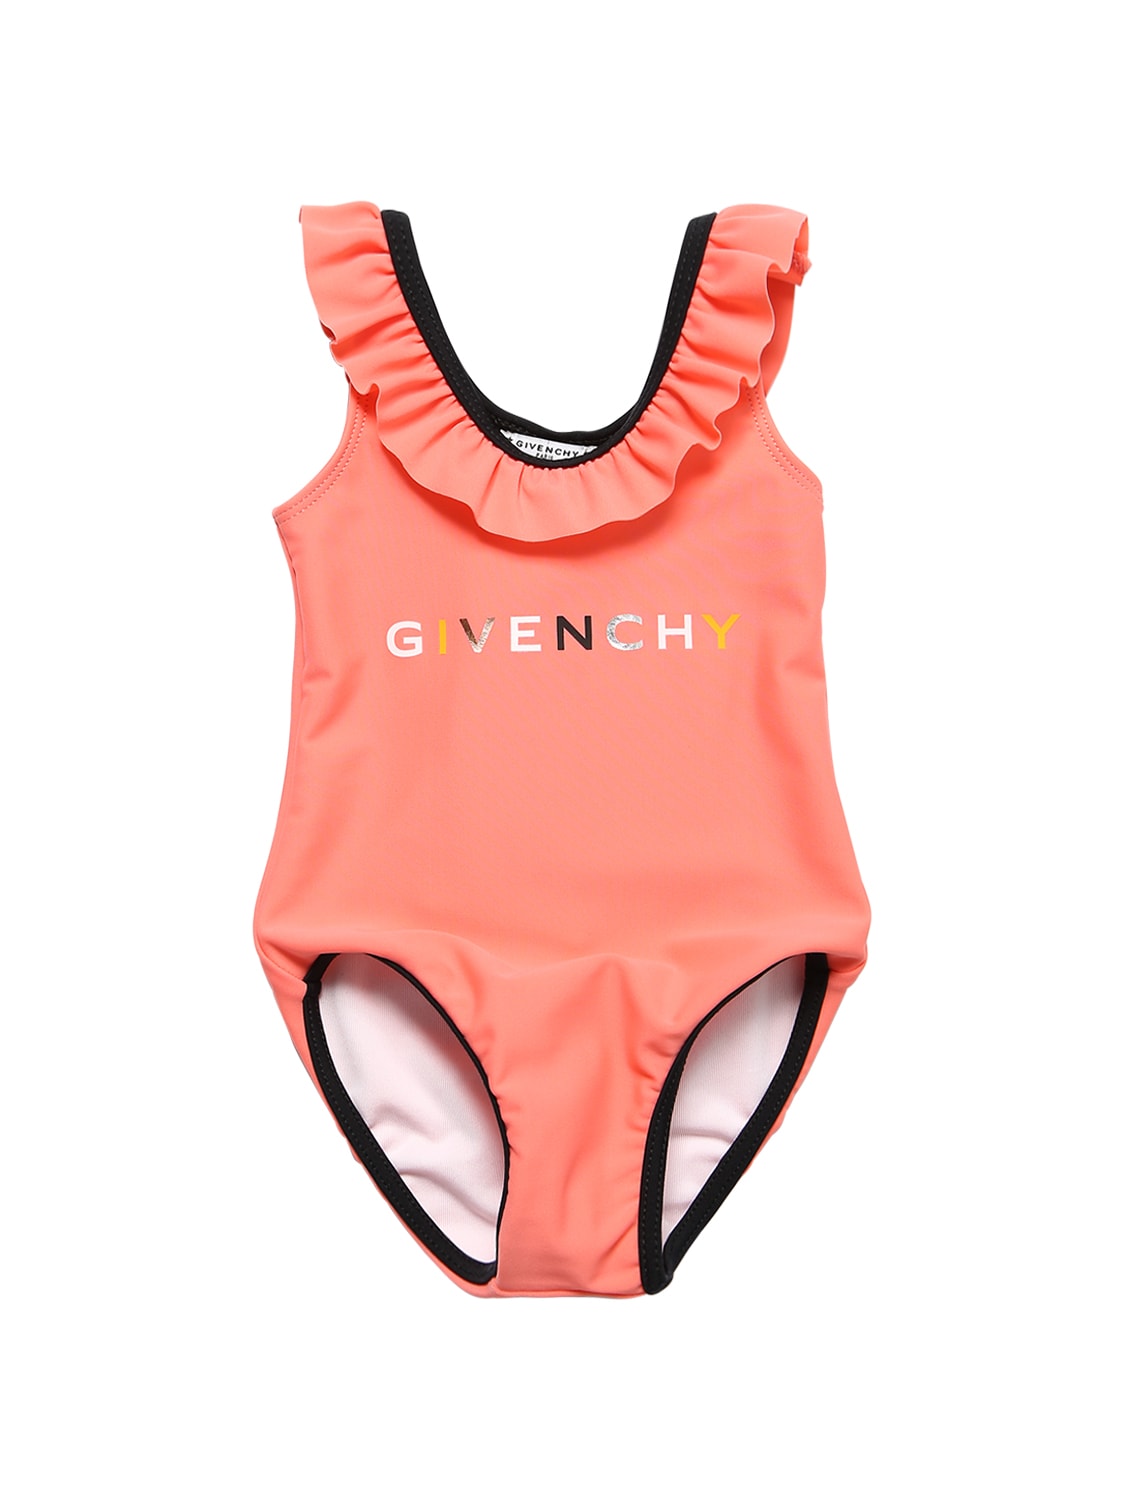 givenchy bathing suit one piece